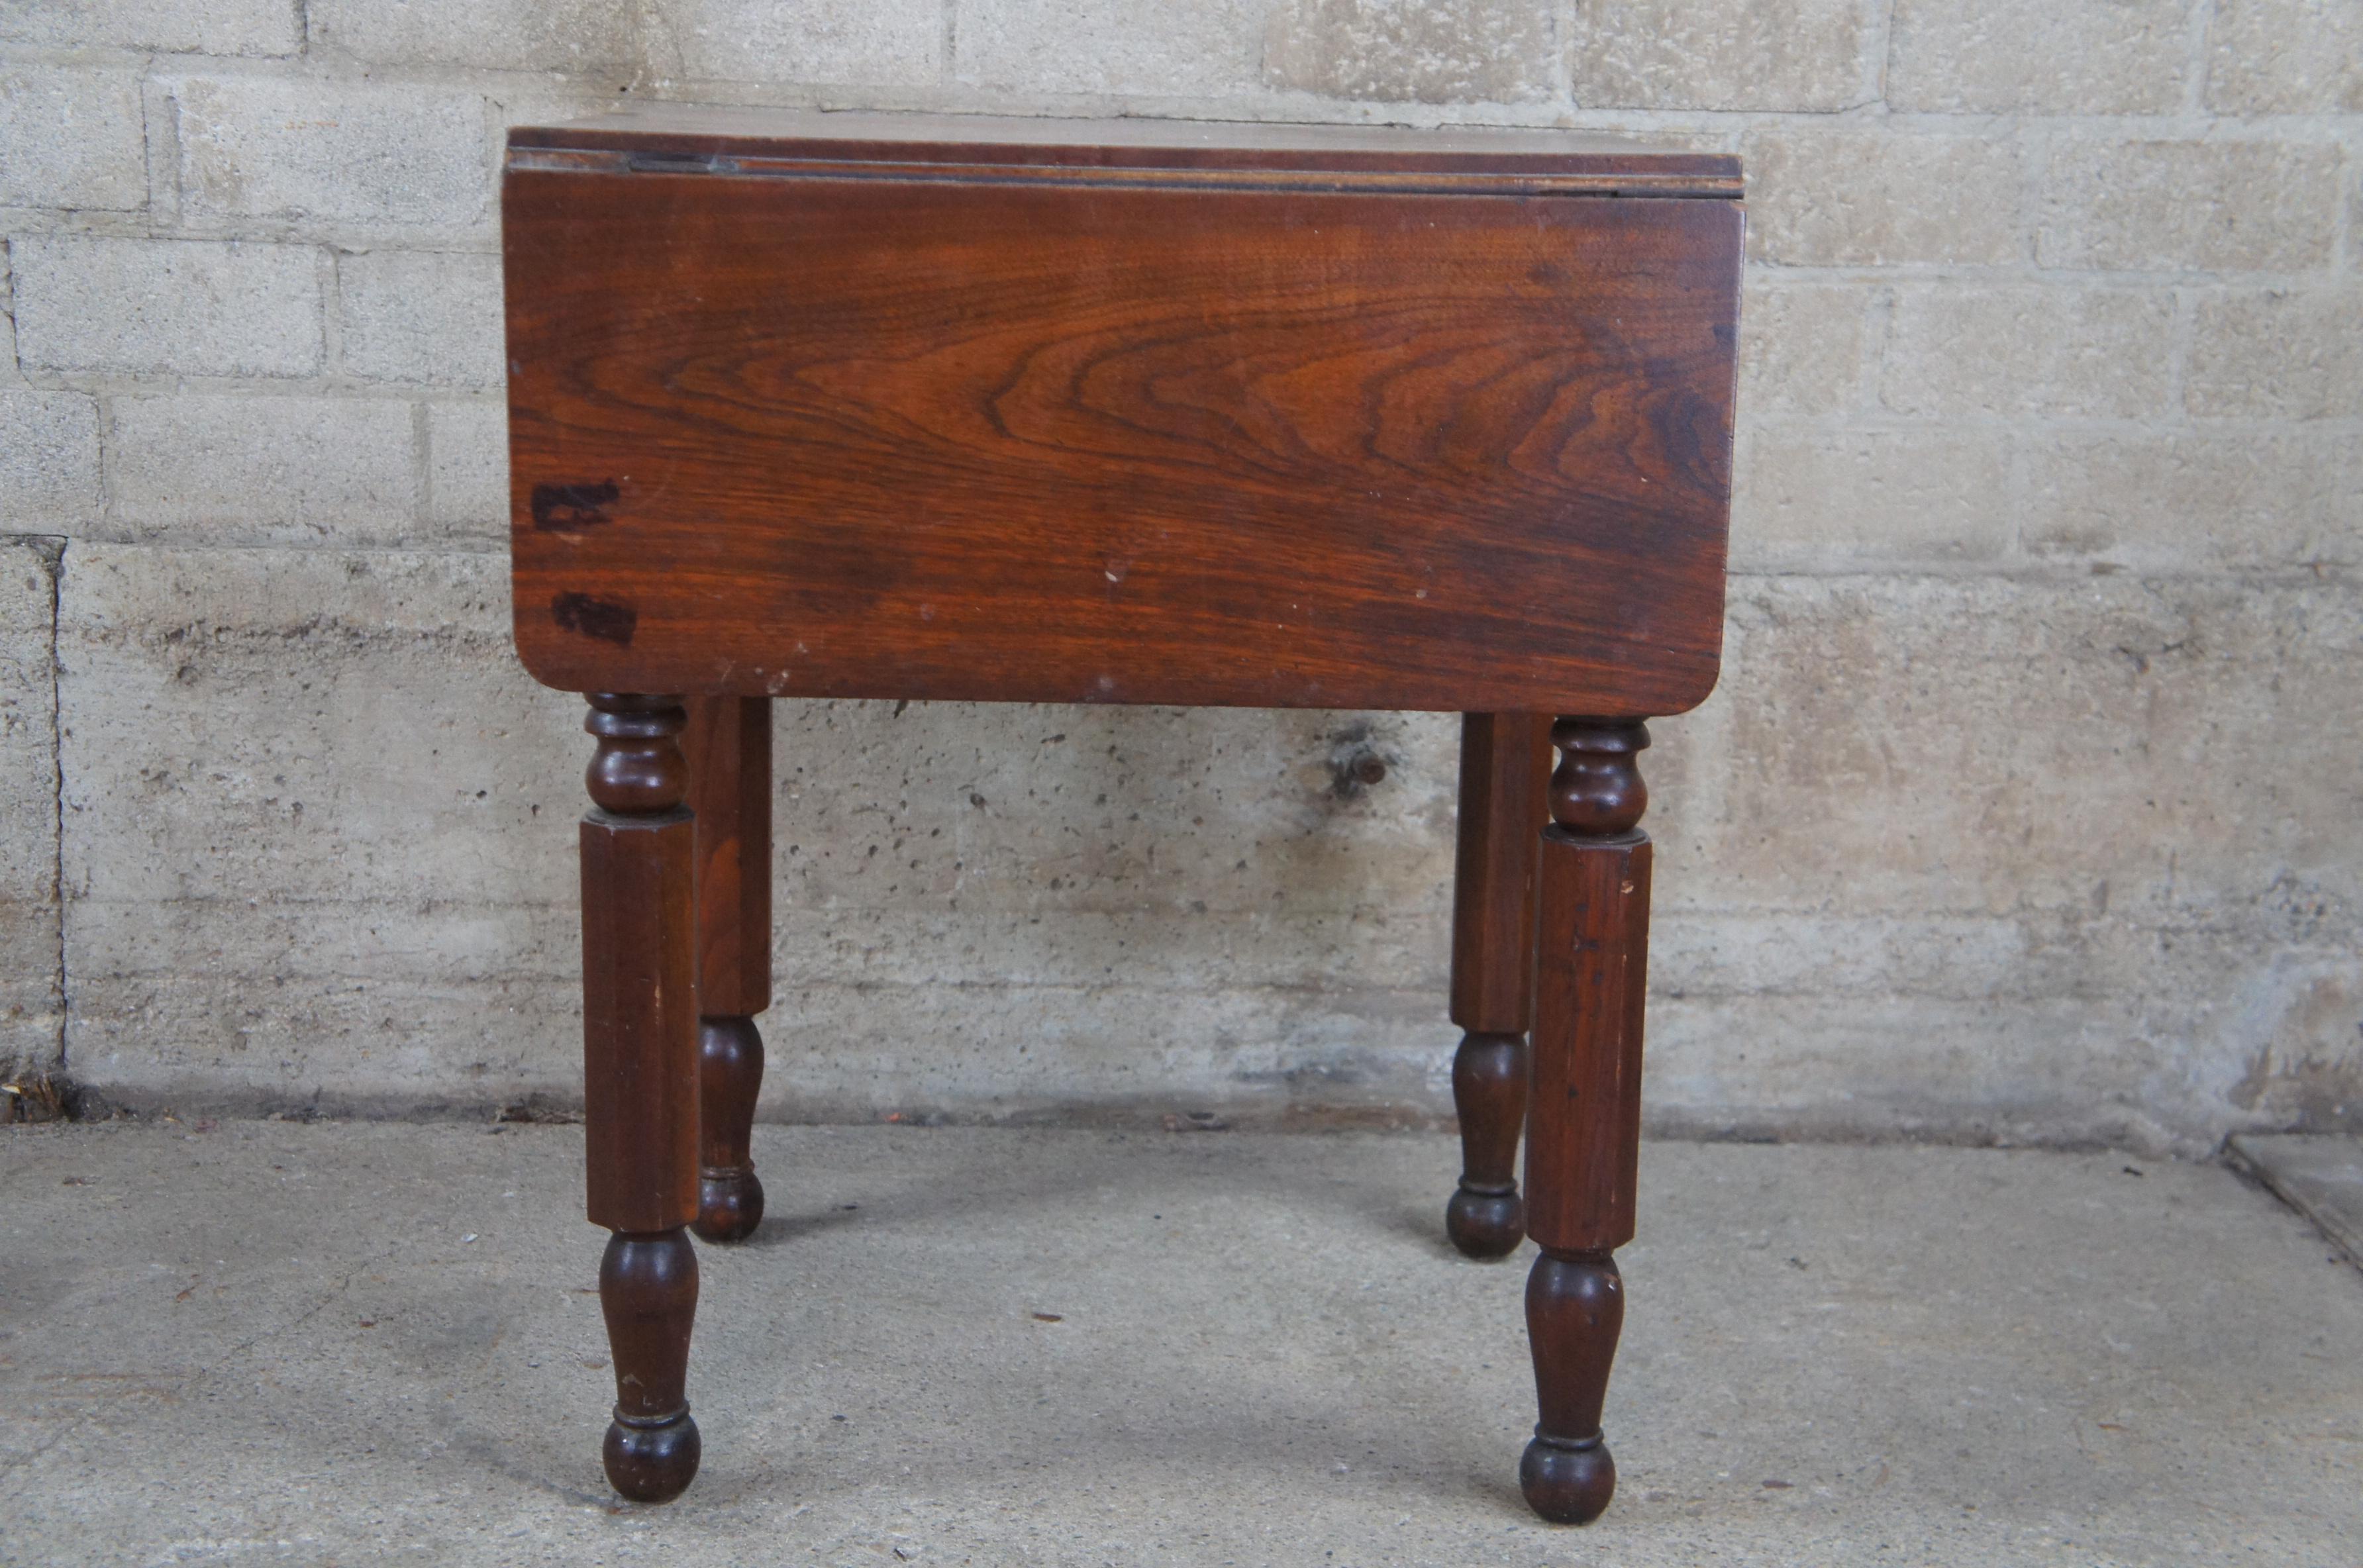 20th Century Antique American Federal Empire Mahogany Drop Leaf Side Table Nightstand Drawer